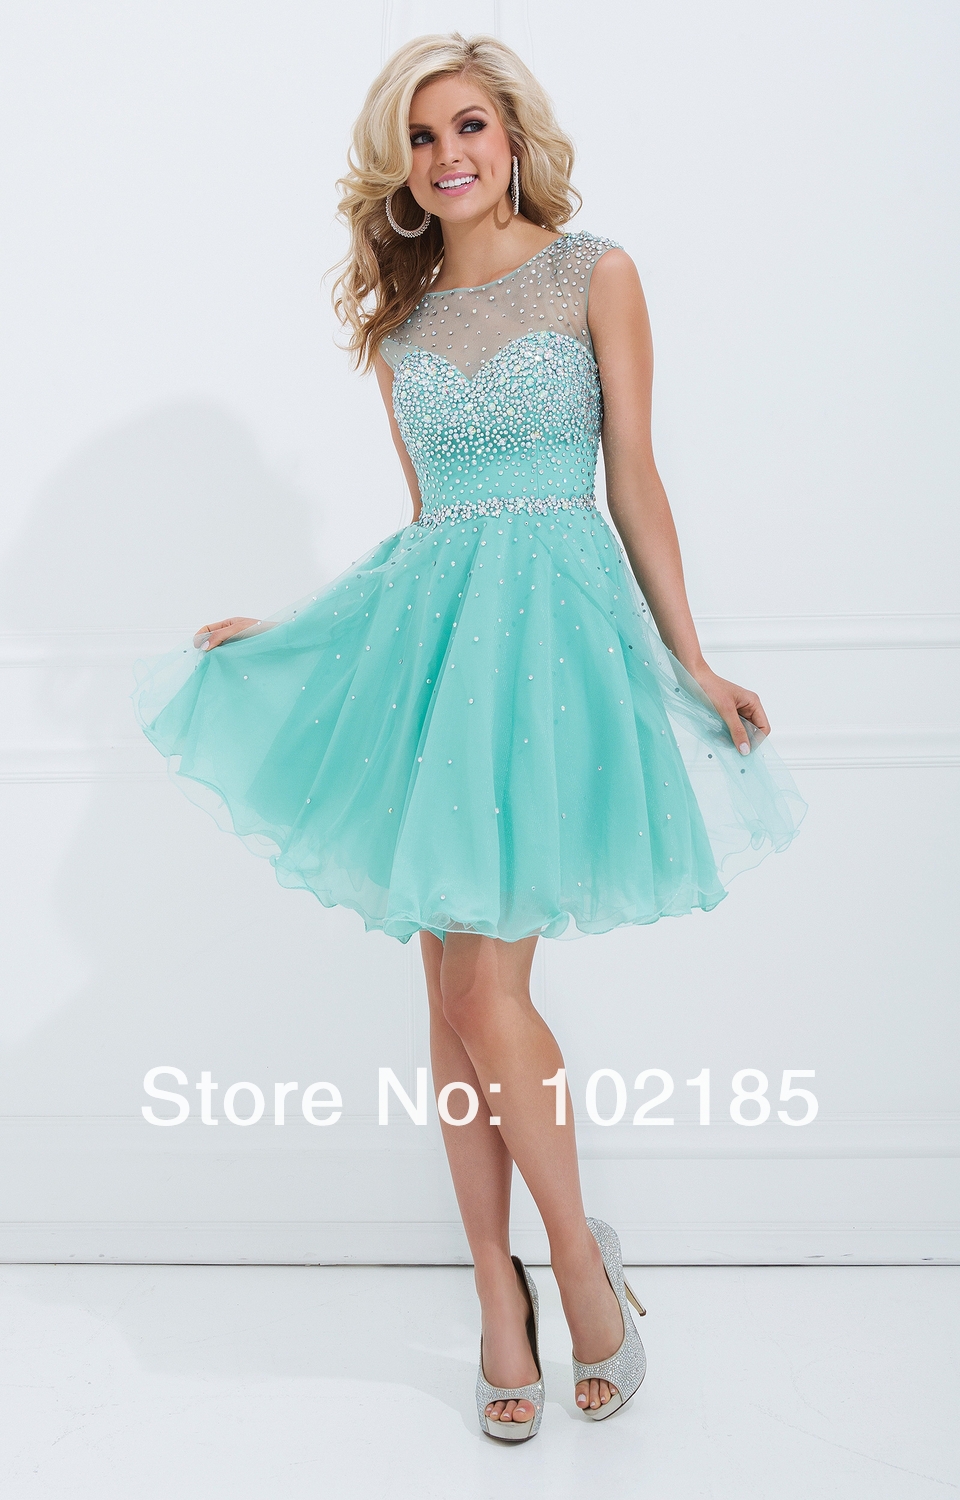 Homecoming Dresses For Short Girls - For Beautiful Ladies